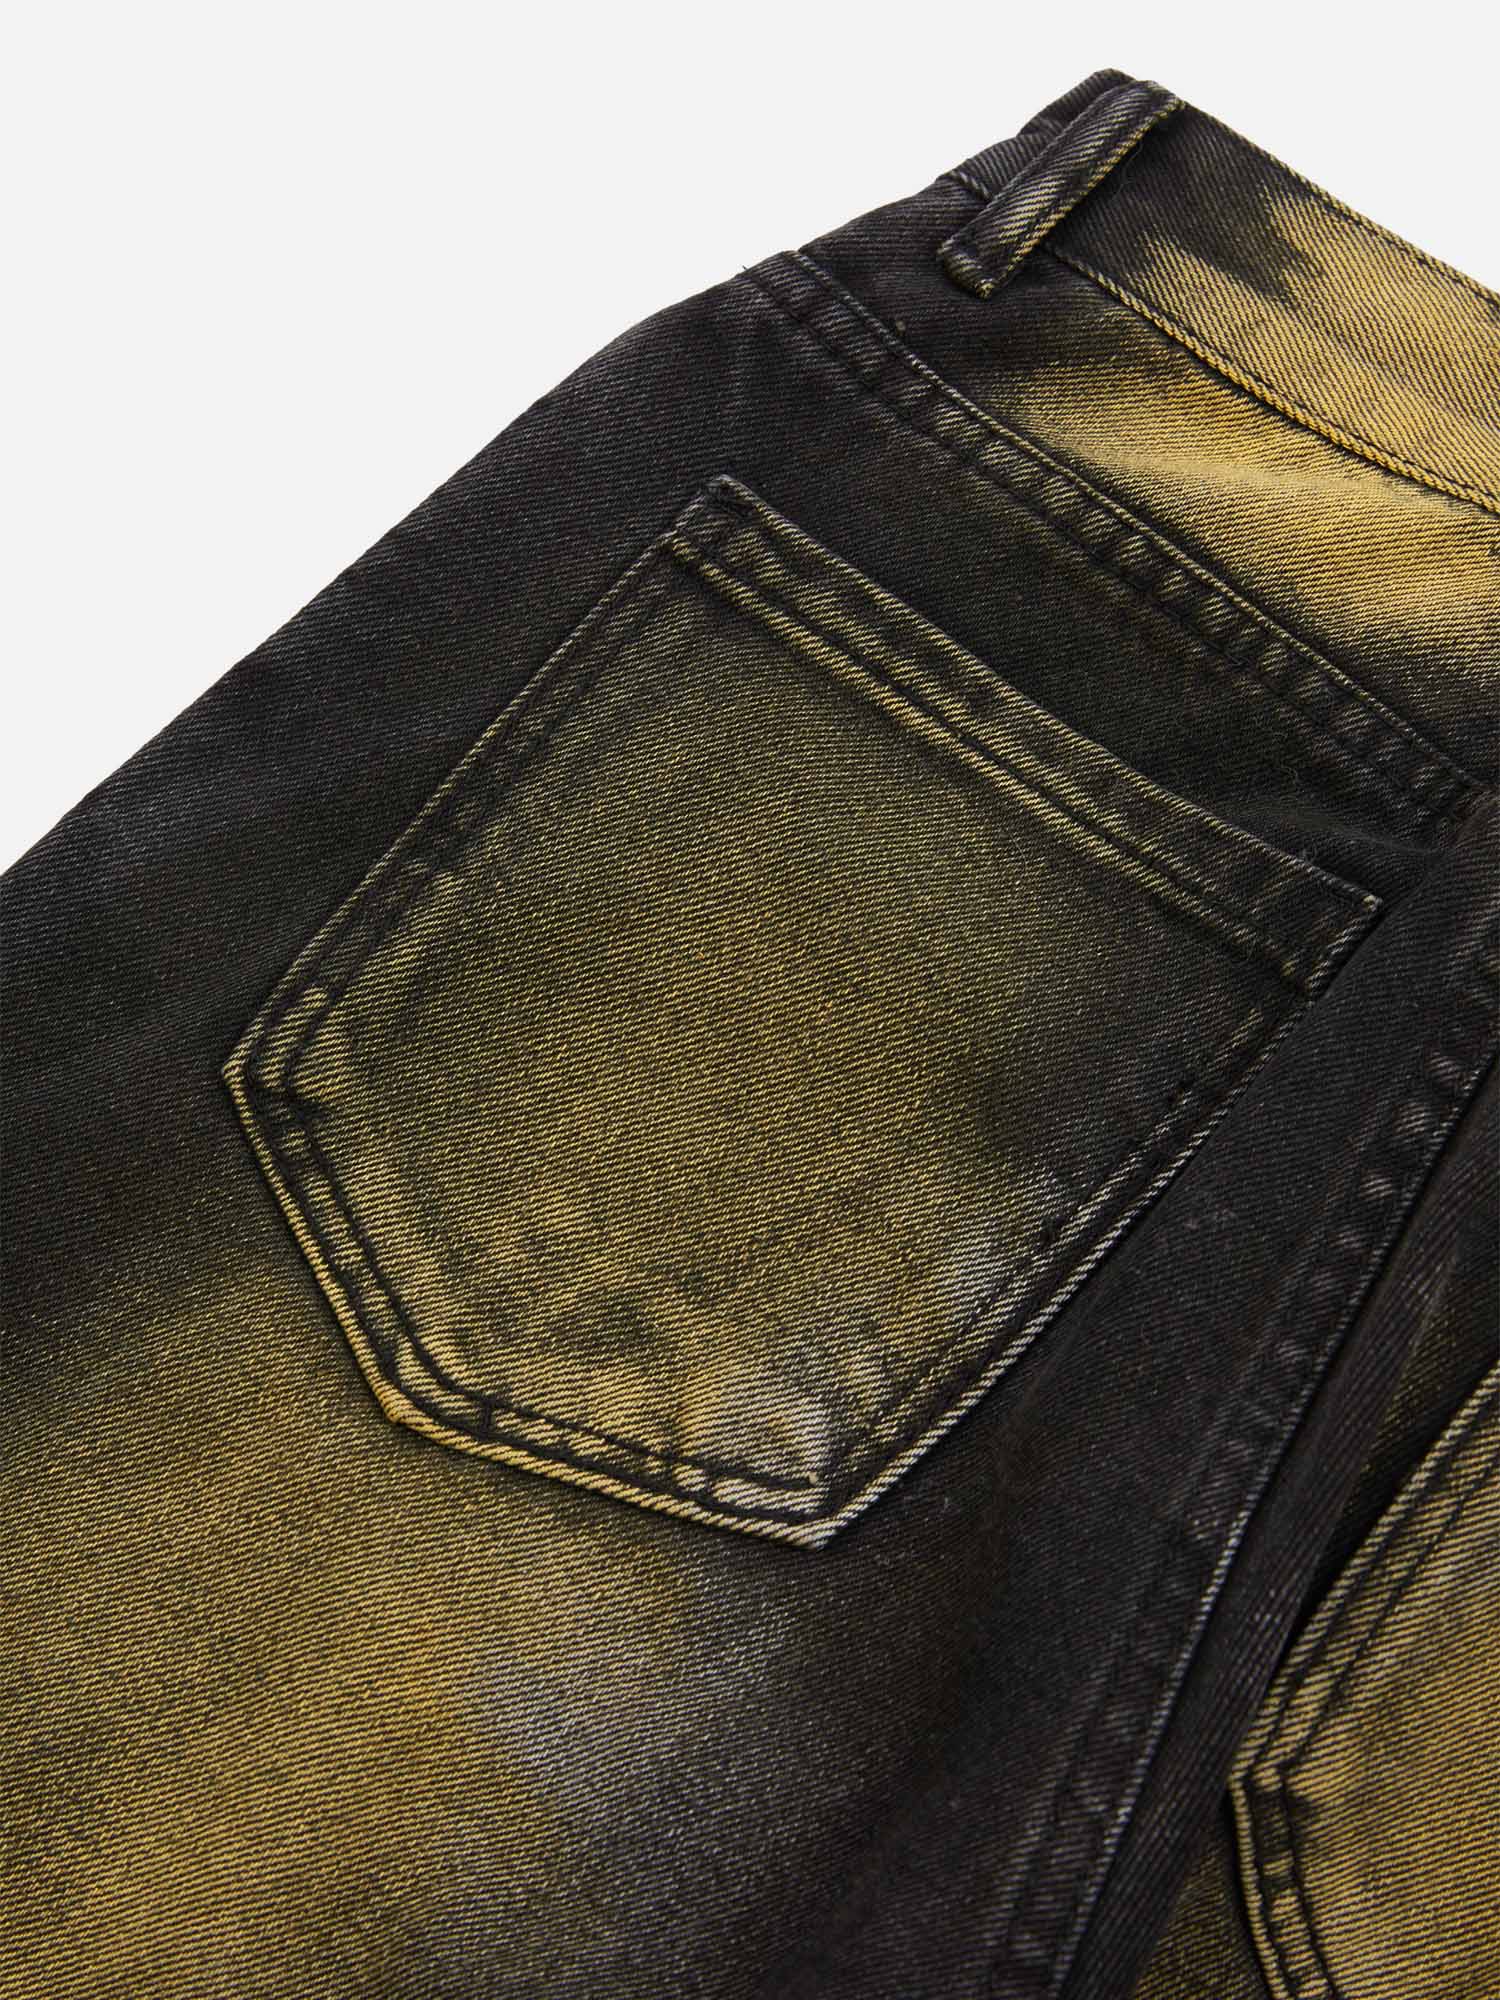 Thesupermade Hip-hop Washed Distressed Loose Spray-dyed Jeans